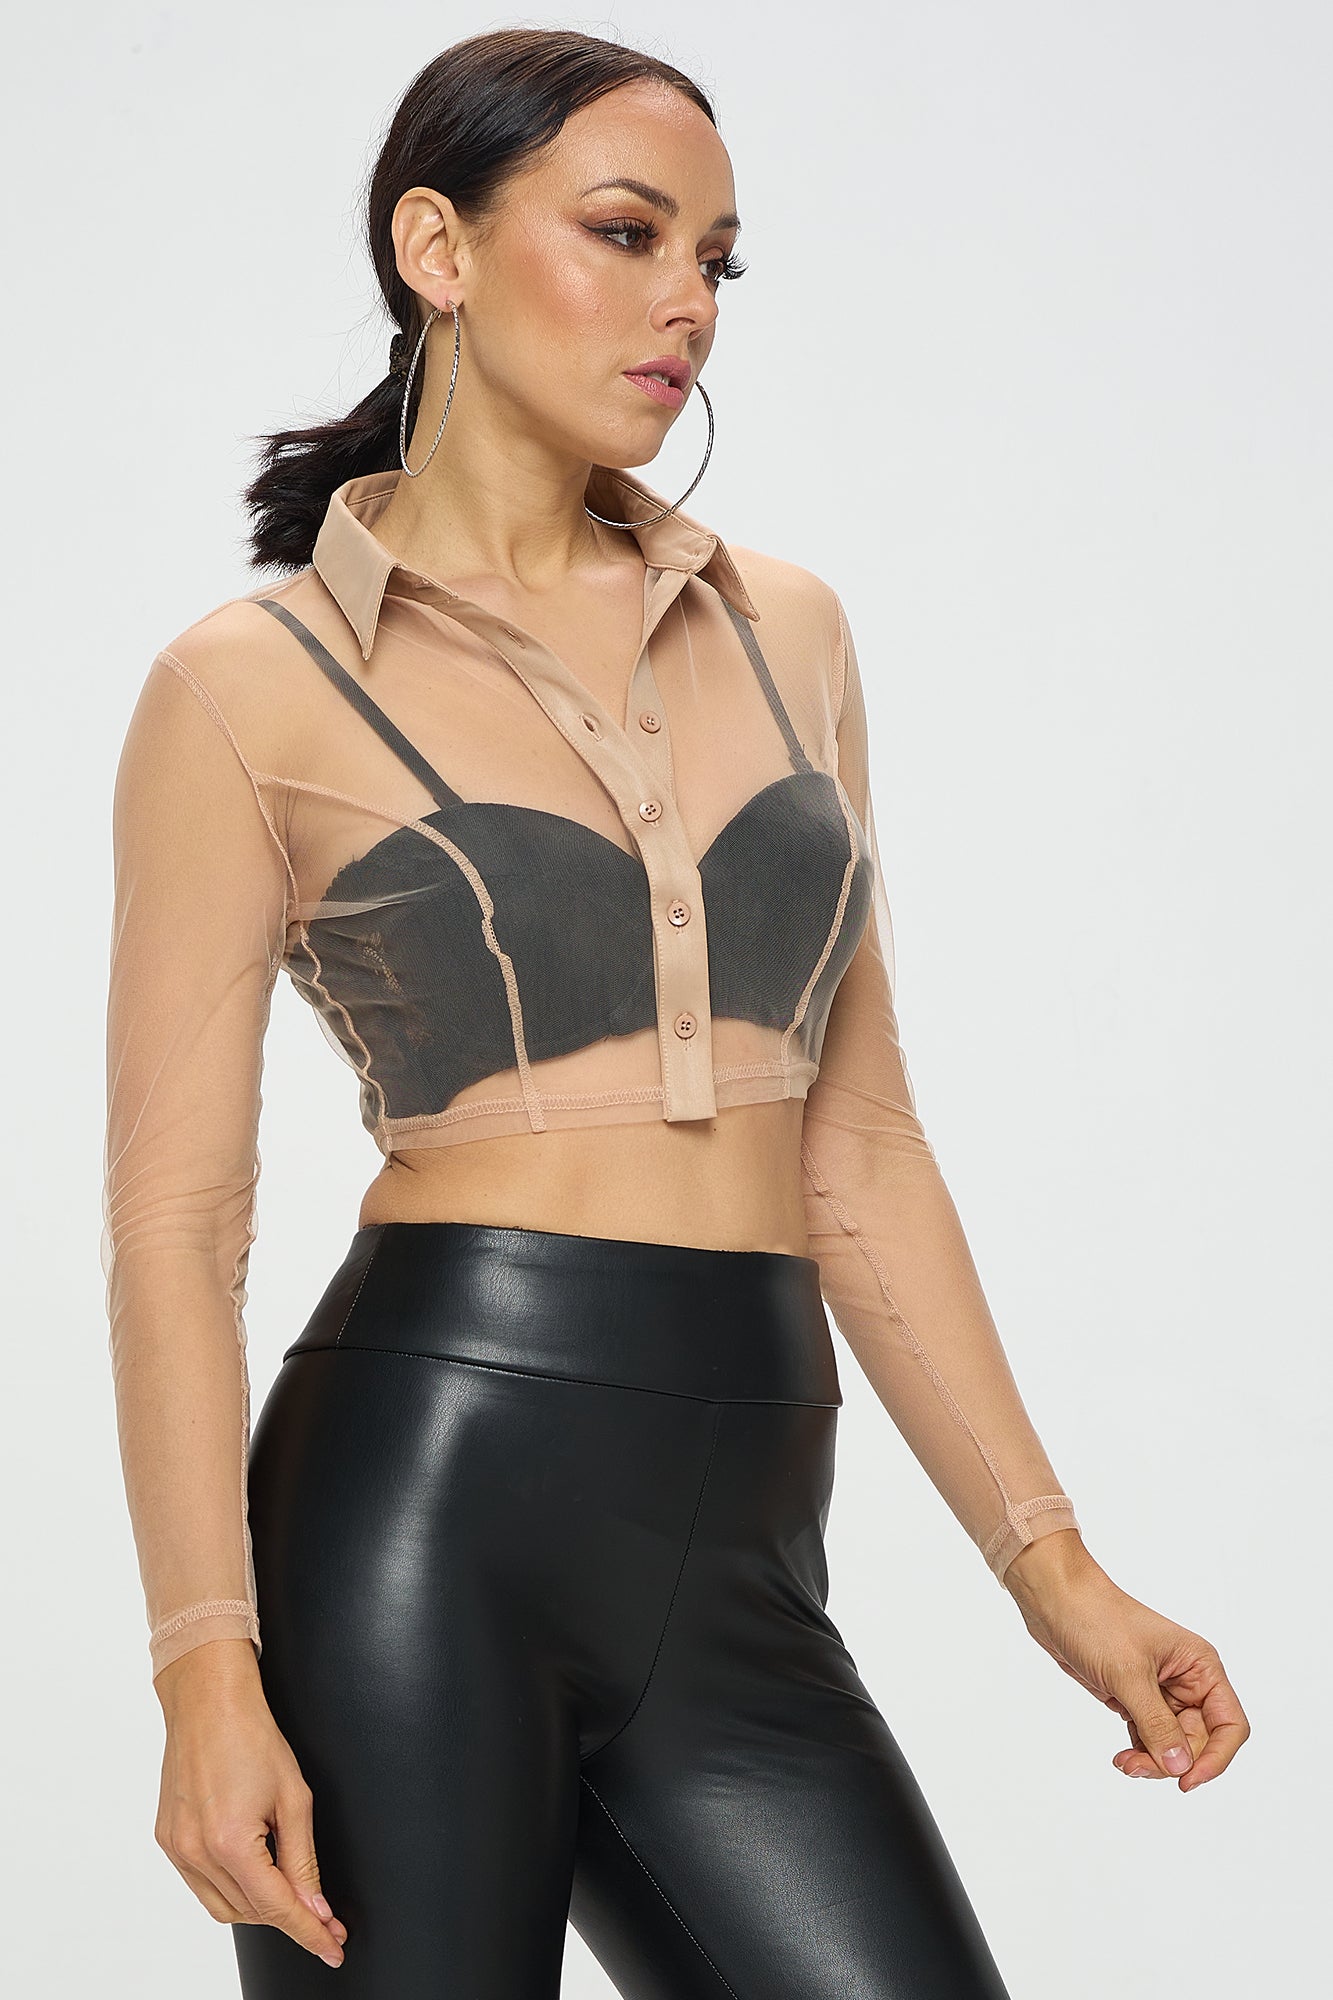 MESH SEE THROUGH BLOUSE CROP TOP – OhYes Fashion